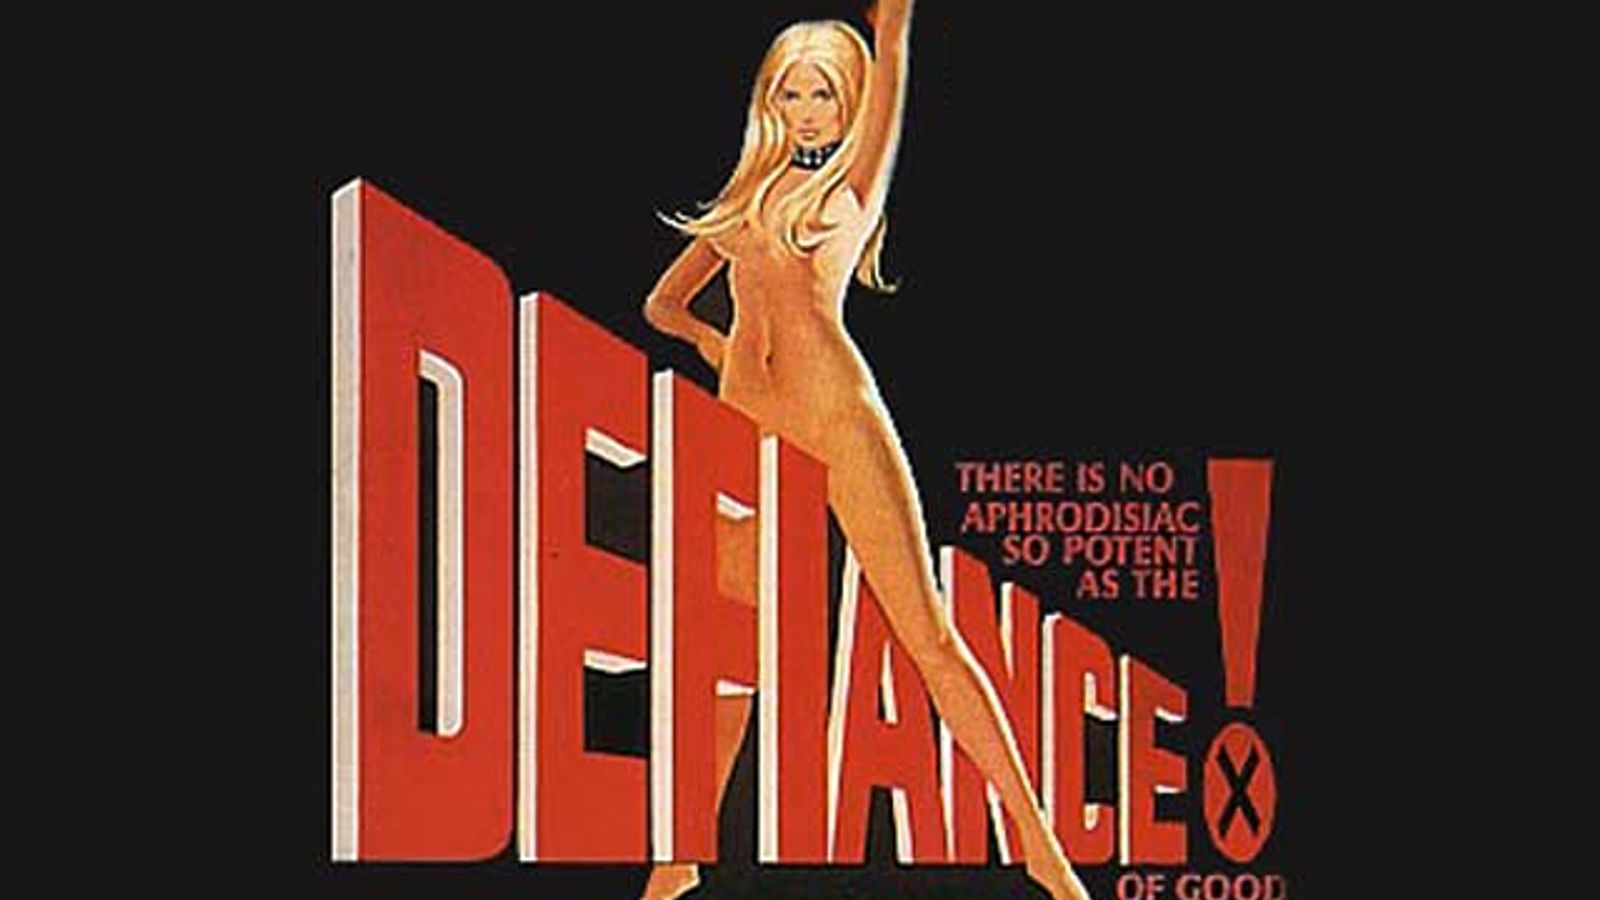 Paging Fred Lincoln: 'Defiance' Screens Saturday at New Beverly Cinema